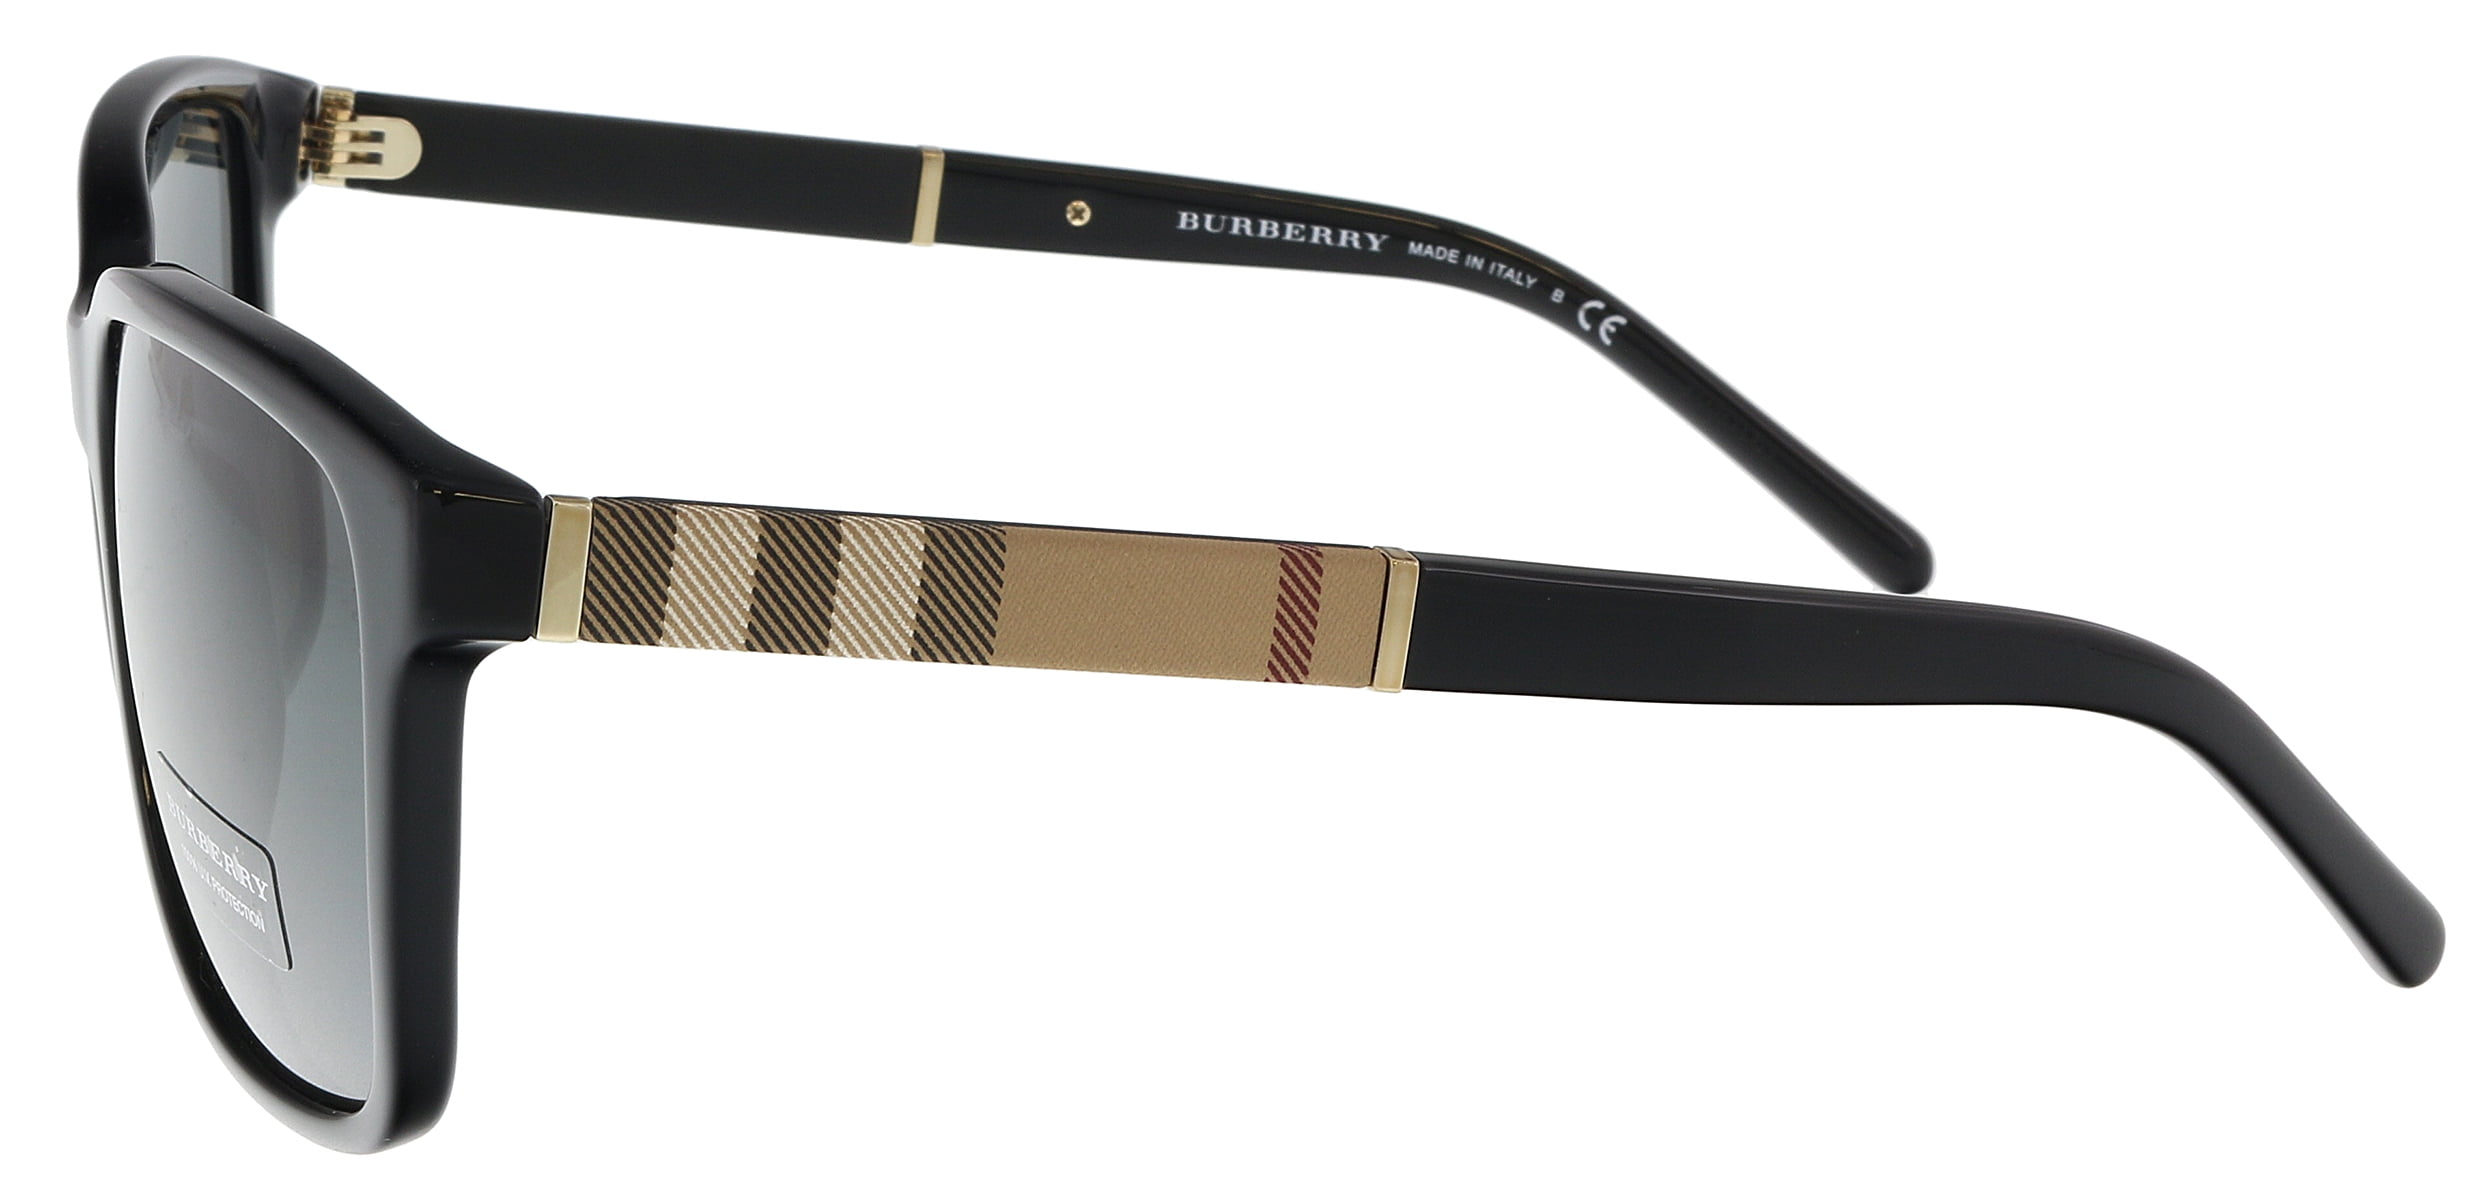 Burberry 58 mm Black Sunglasses | World of Watches